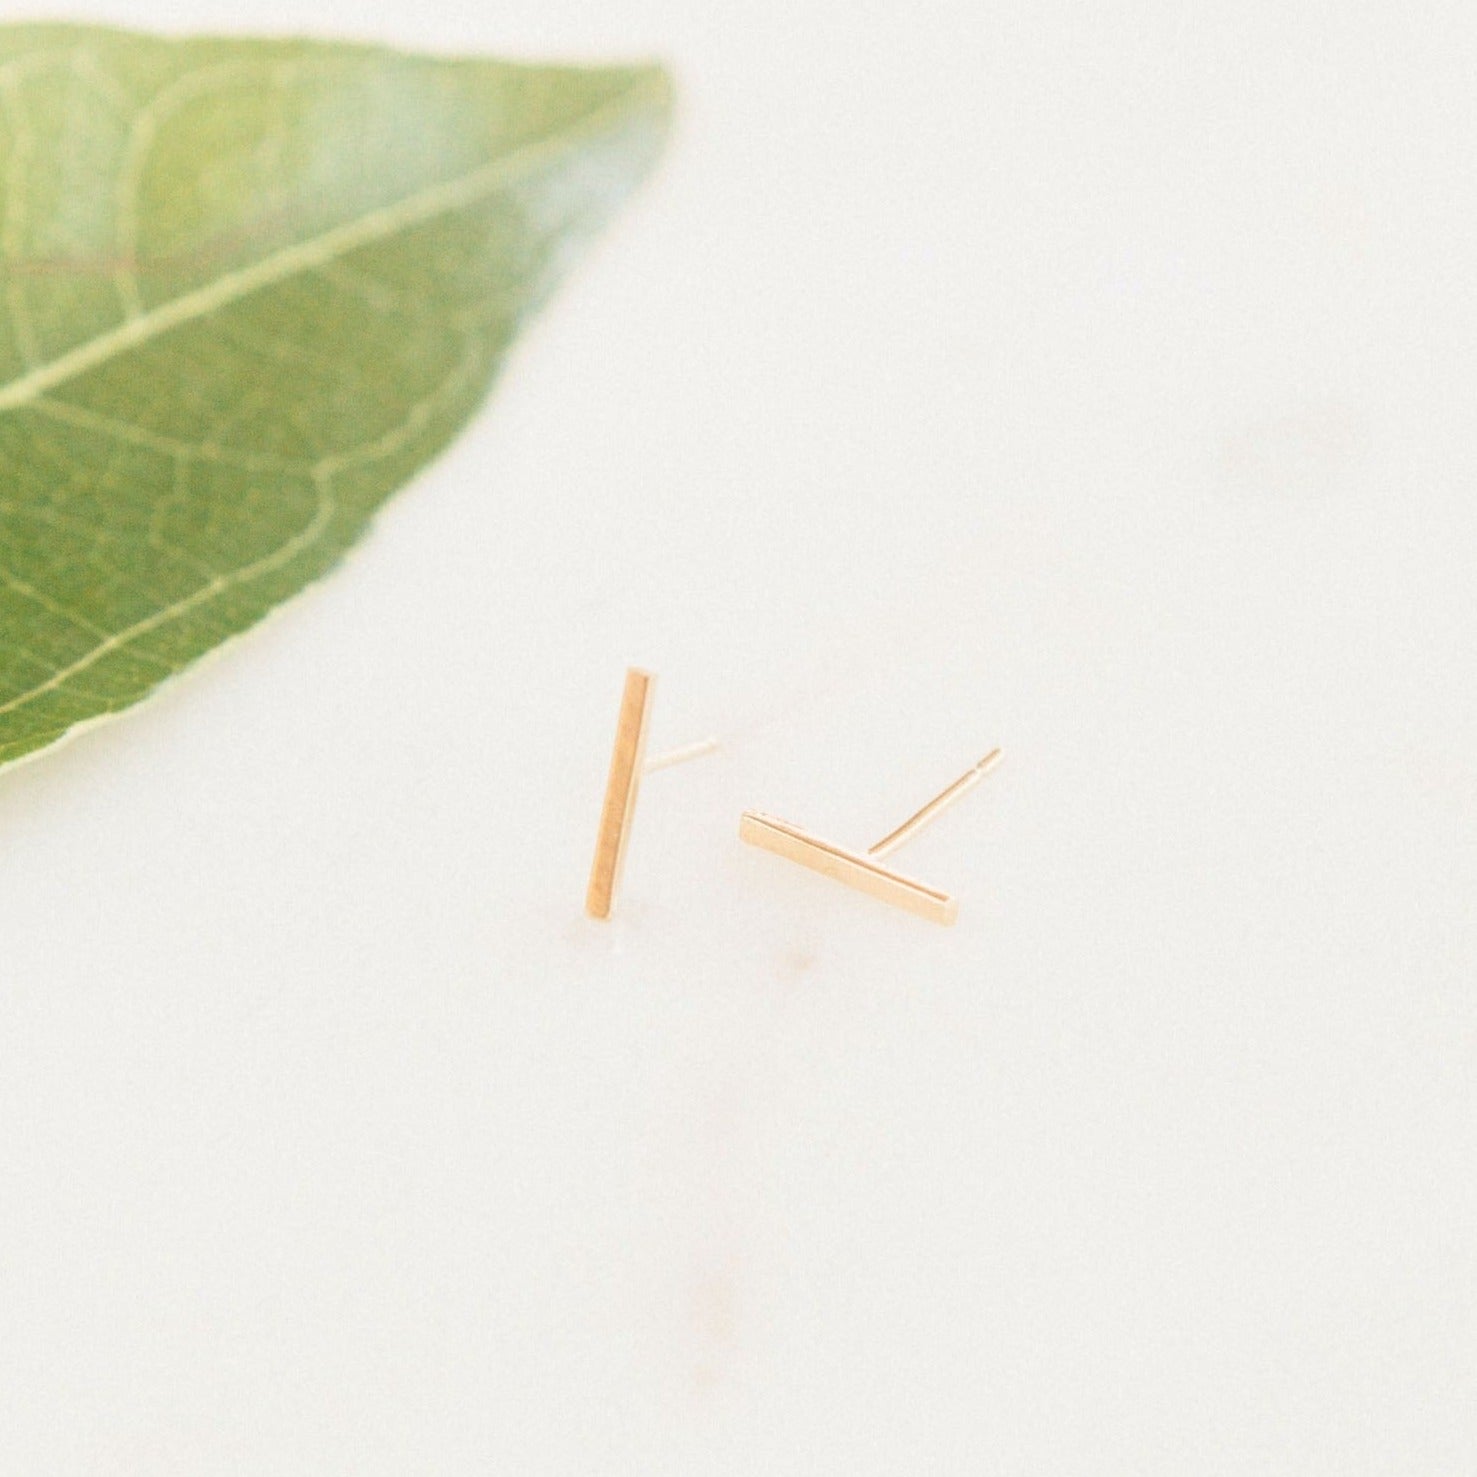 The Bar Studs. Made for the minimalist. Handmade in America by Katie Dean Jewelry. Solid 14k Yellow Gold. Nickel free and hypoallergenic.